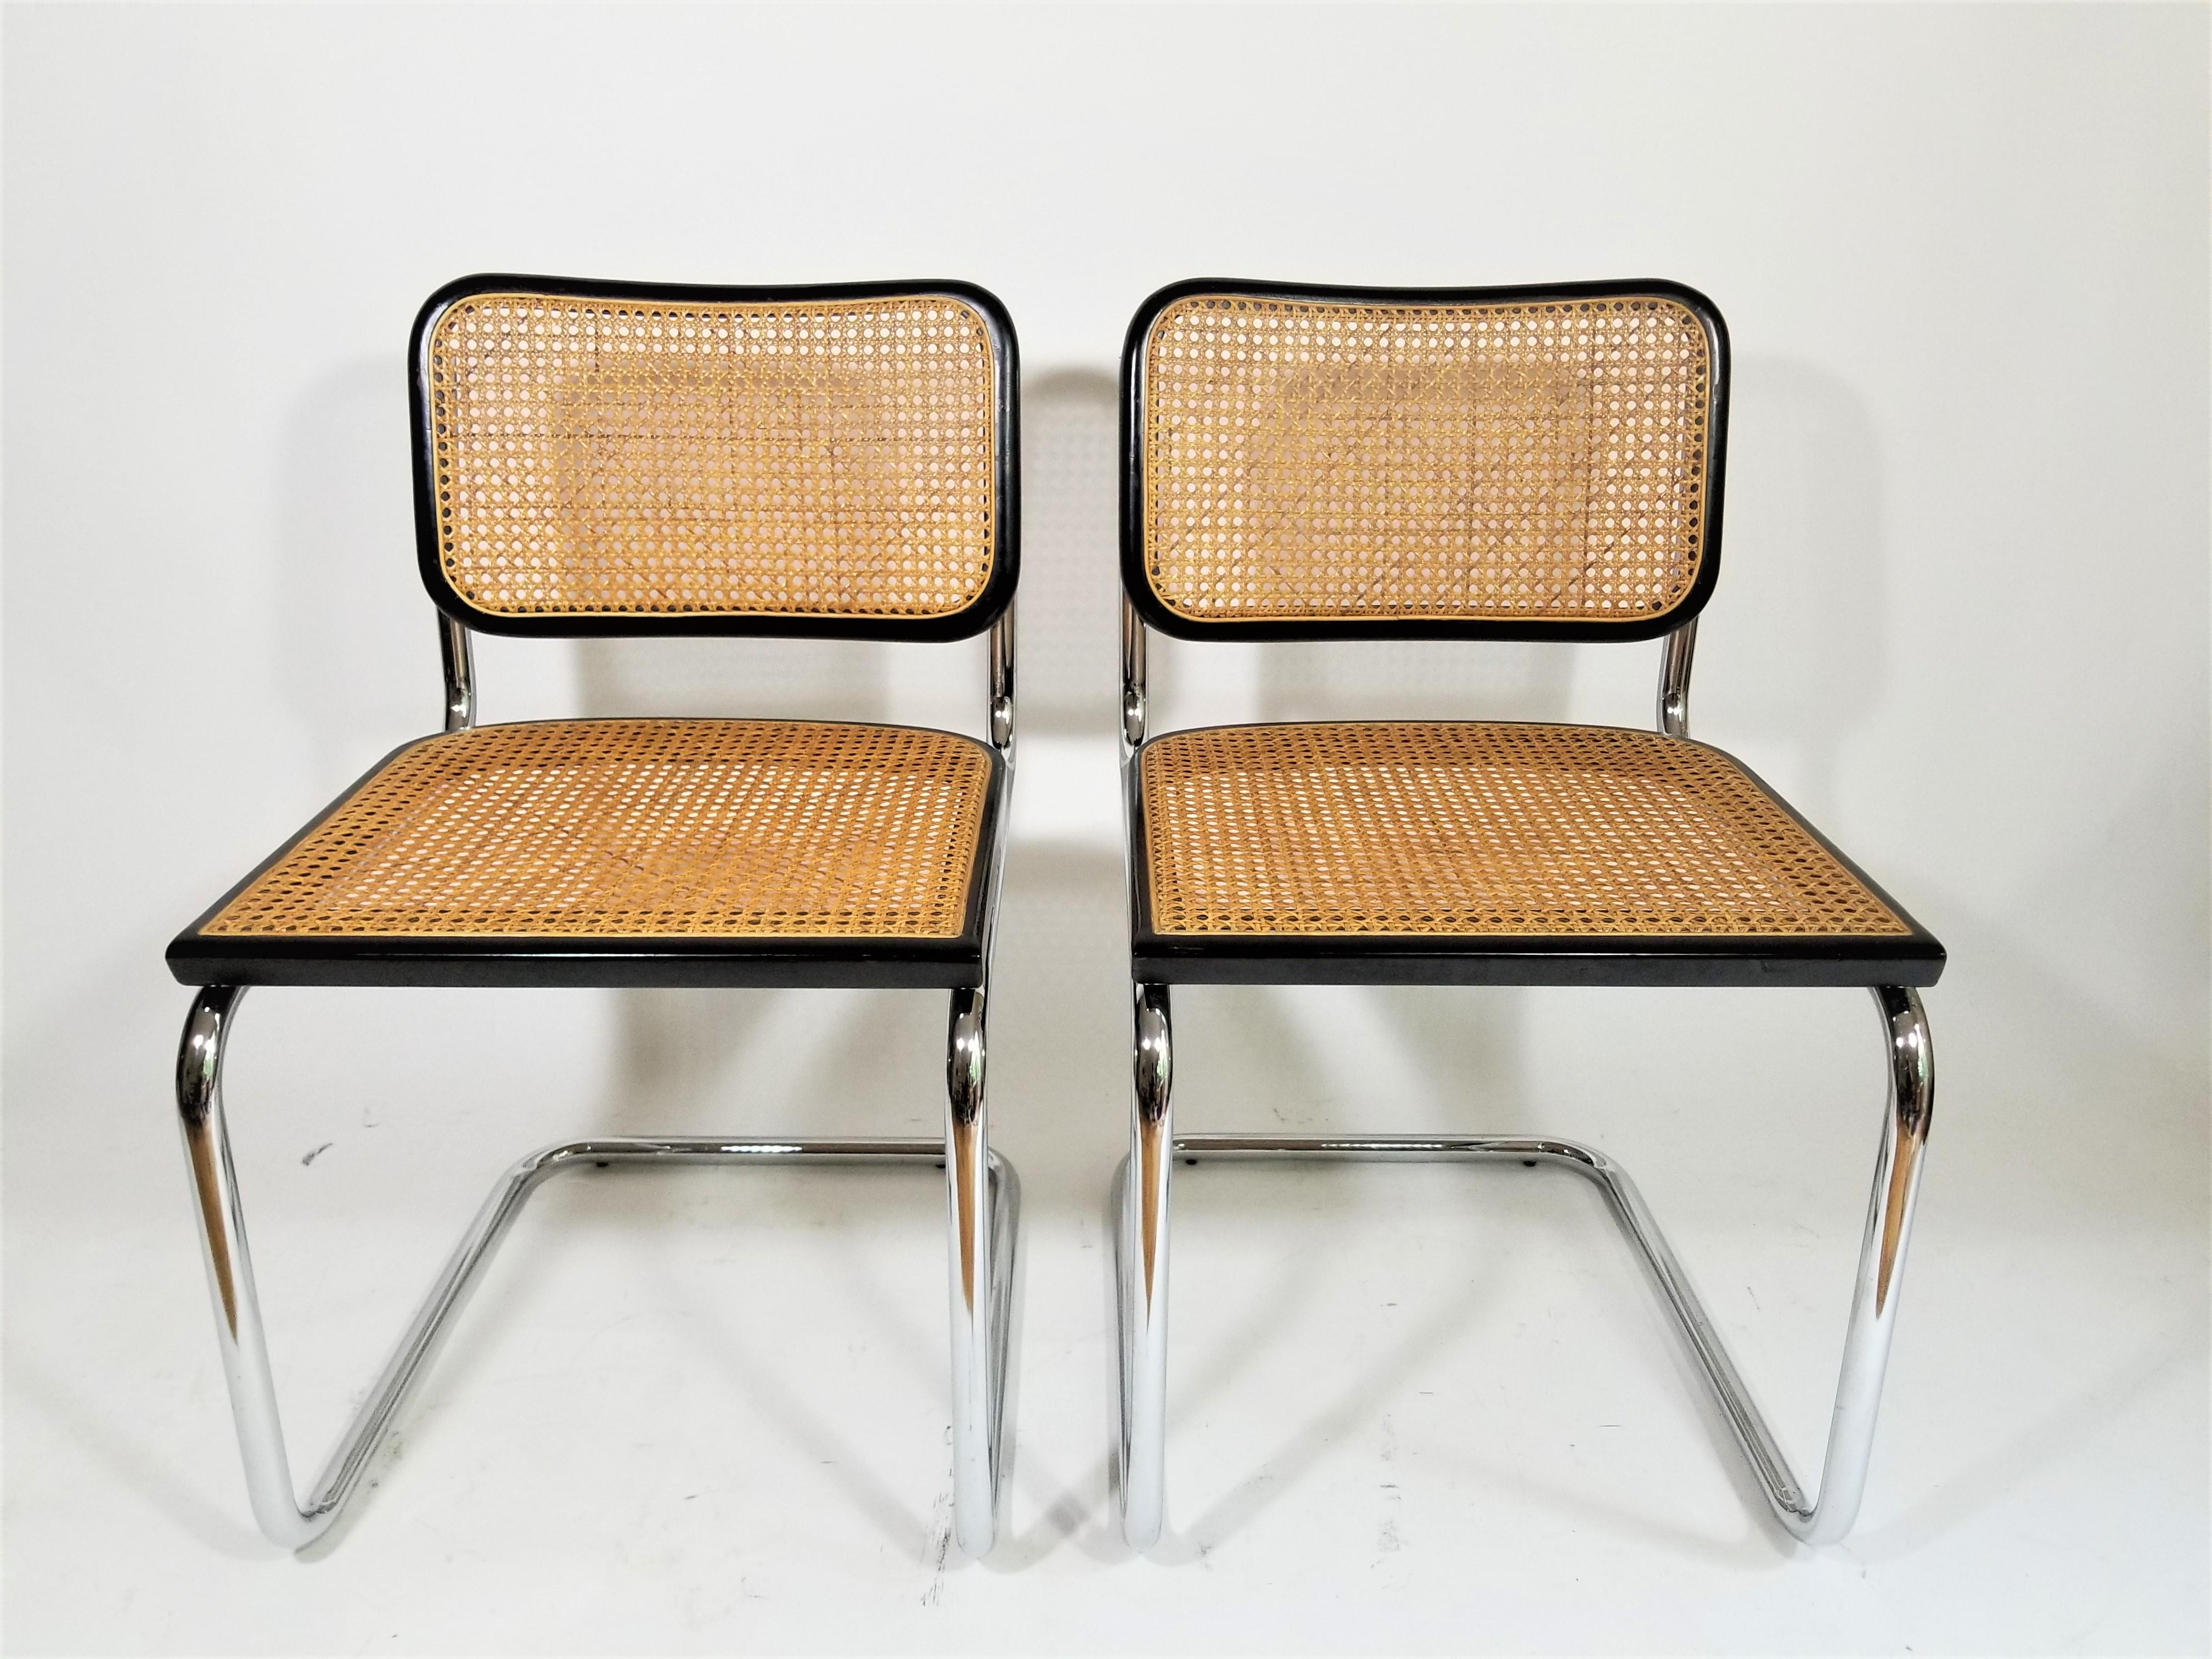 Midcentury set of of 4 Marcel Breuer Cesca side chairs. Black finish. Cane back and seat. Classic tubular cantilever chrome frame. We polish all chrome, 
Made in Italy.
Measurements:
Height 32.5 inches
Seat height 18.5 inches
Width 18.5 inches
Depth